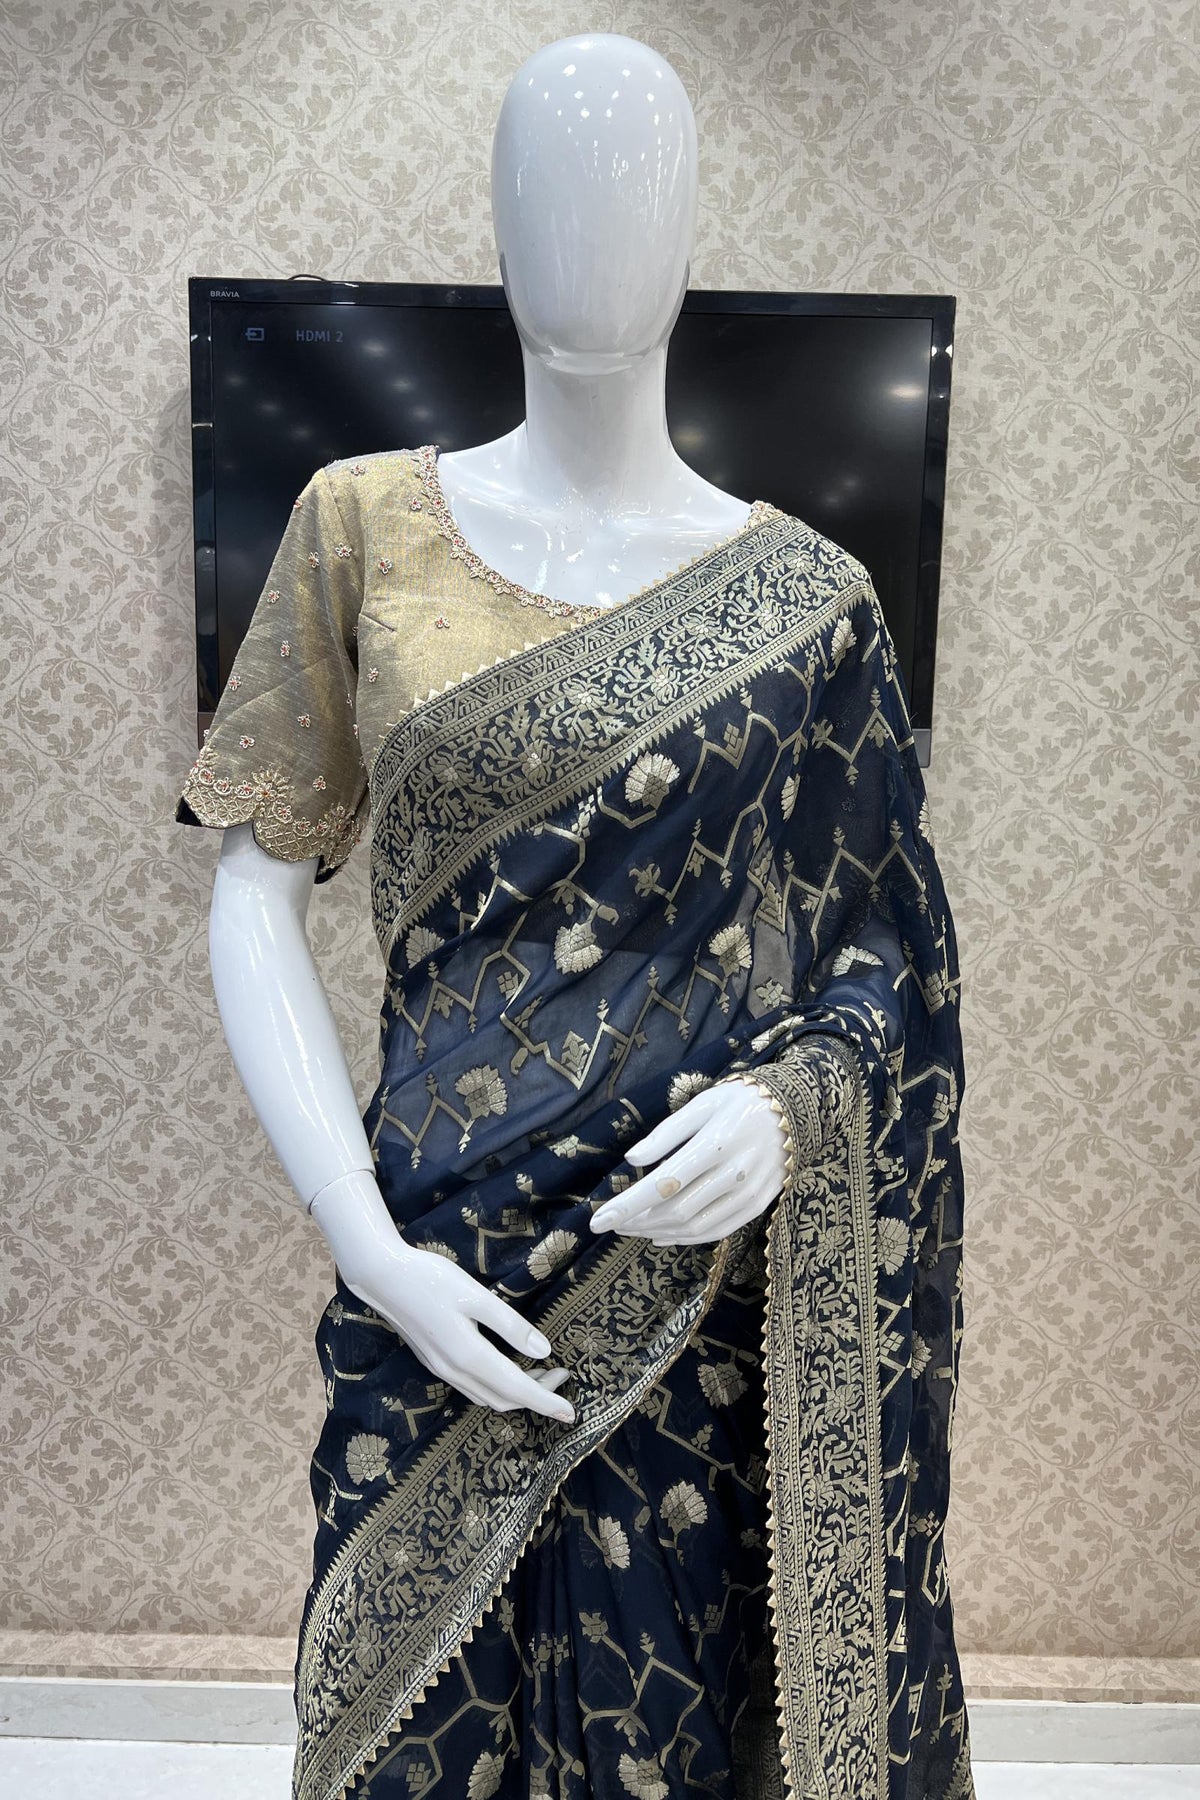 Nalli - This exquisite range of Banarasi georgette sarees adorned with  gorgeous zari buttas and zari border makes it the perfect choice for the  party. Shop Now at https://www.nalli.com/black-banarasi-georgette-saree-es0076344  https://www.nalli.com ...